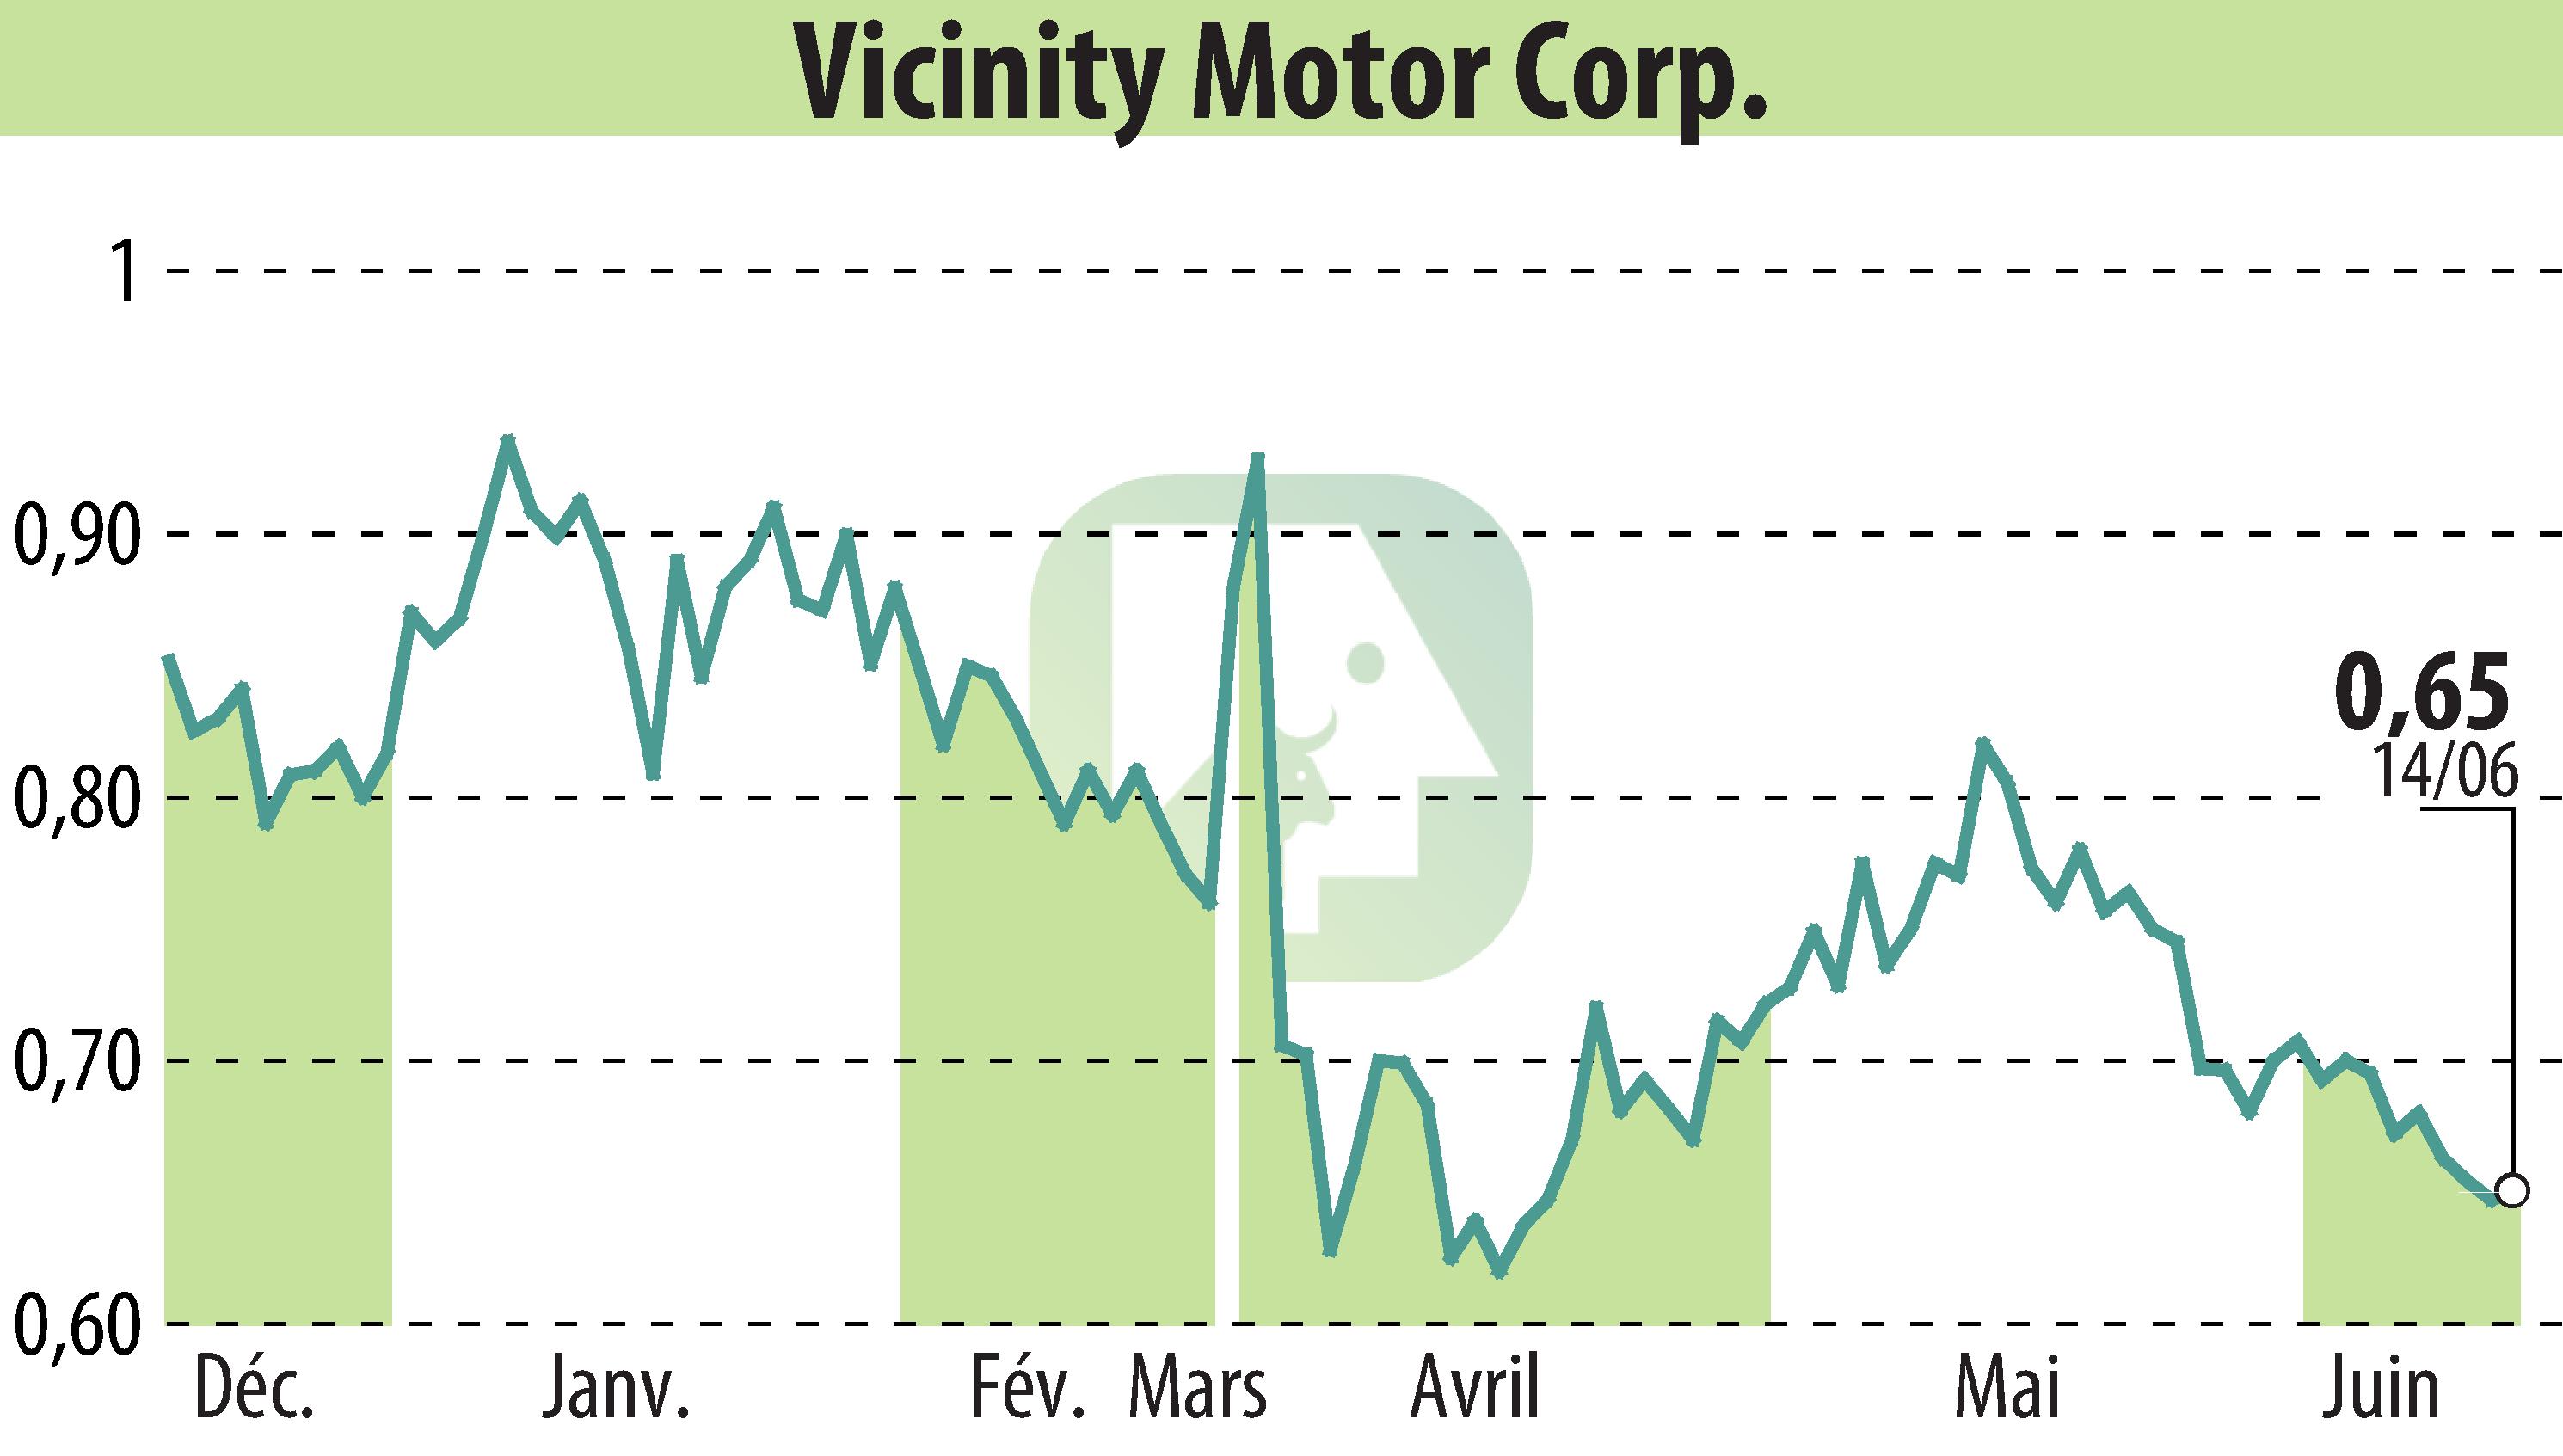 Stock price chart of Vicinity Motor Corp. (EBR:VEV) showing fluctuations.